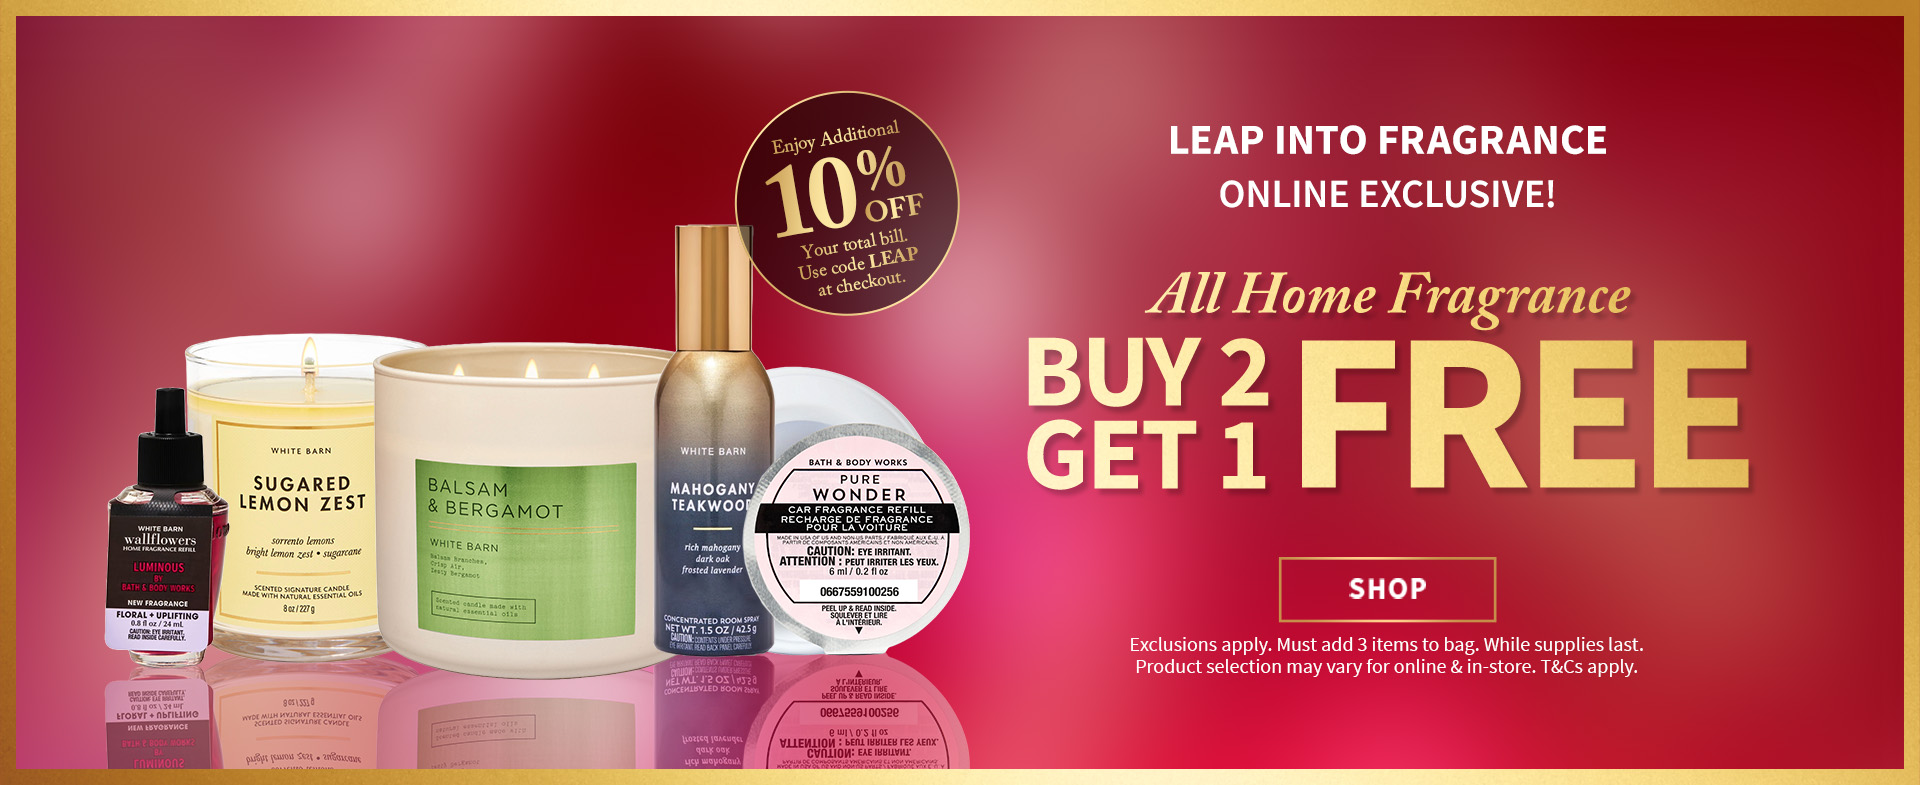 Online Exclusive! Leap Into Fragrance All Home Fragrance B2g1f